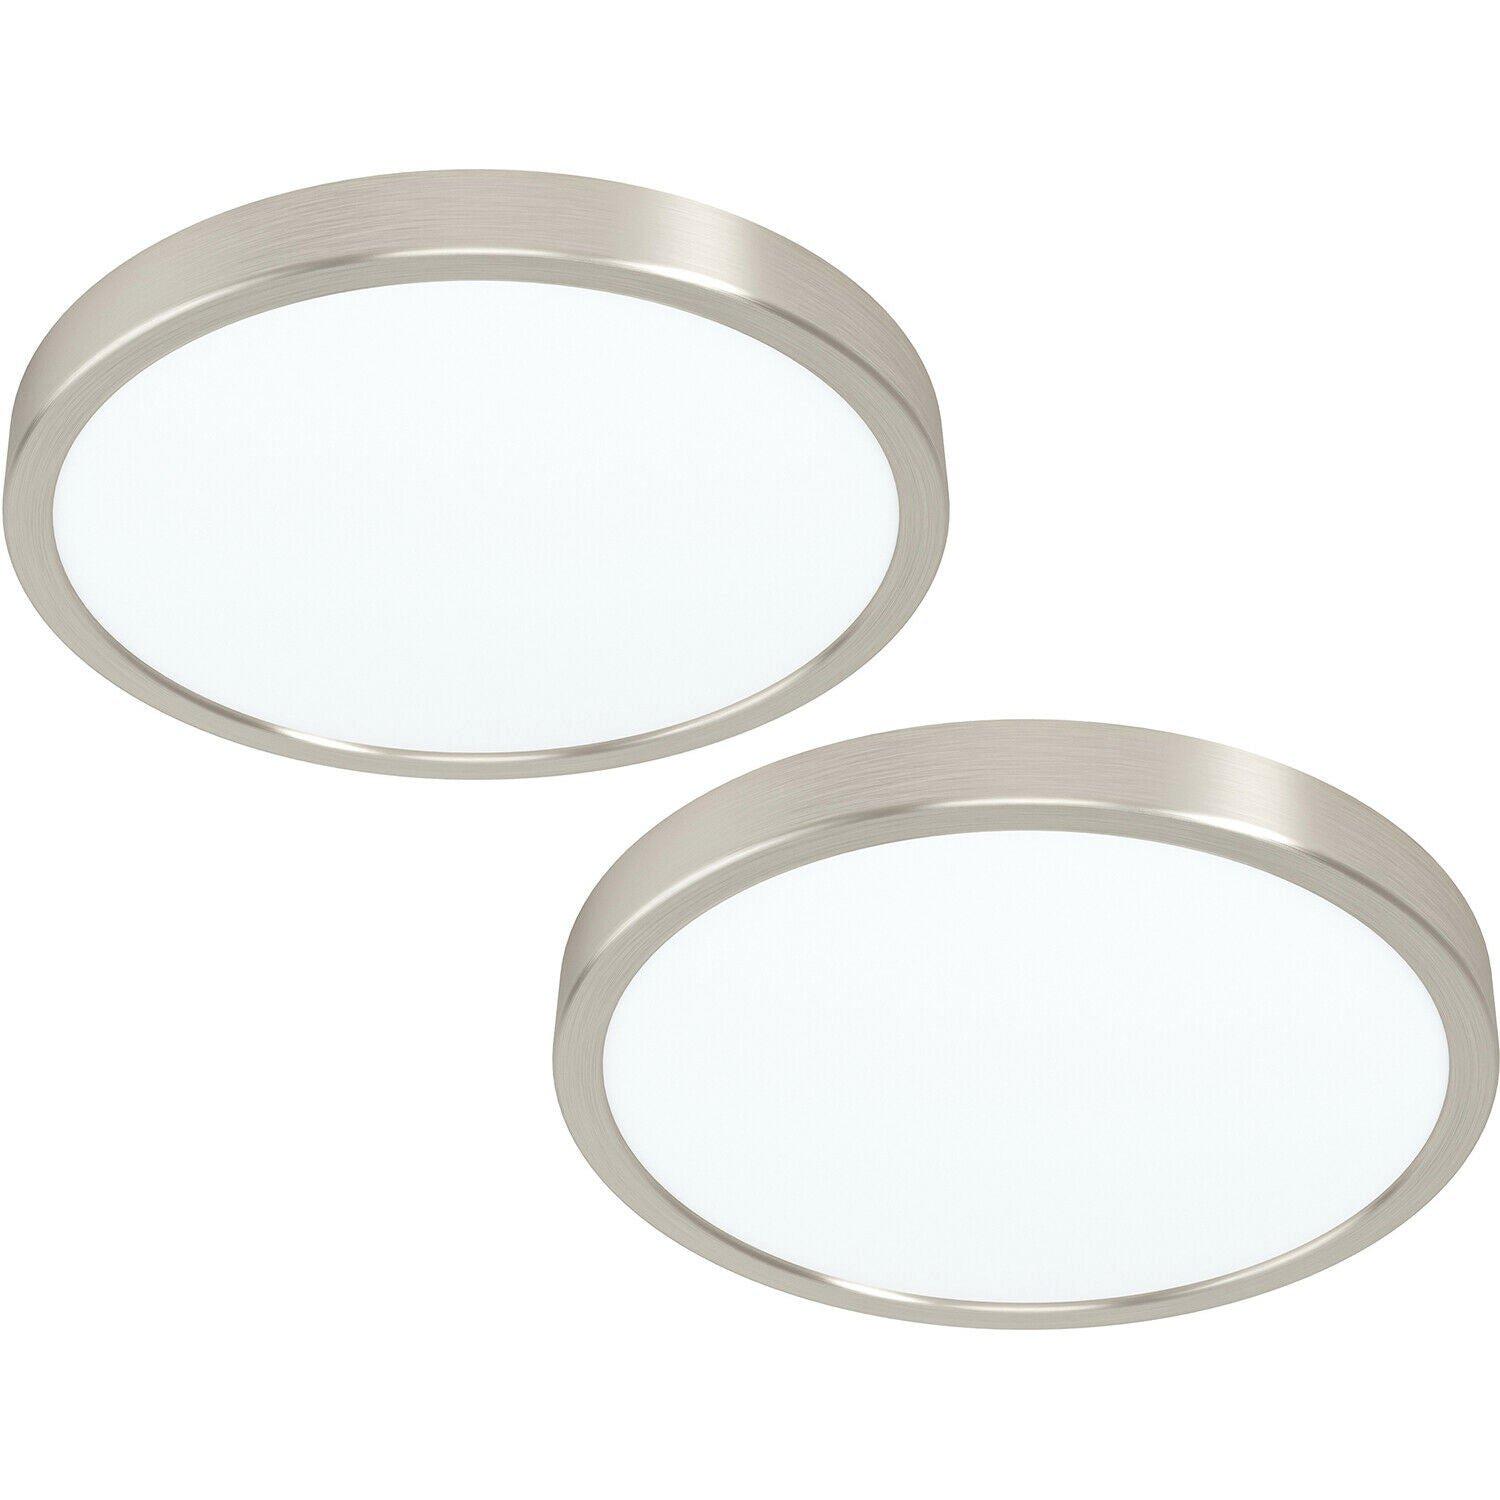 2 PACK Ceiling Light Satin Nickel 285mm Round Surface Mounted 20W LED 3000K